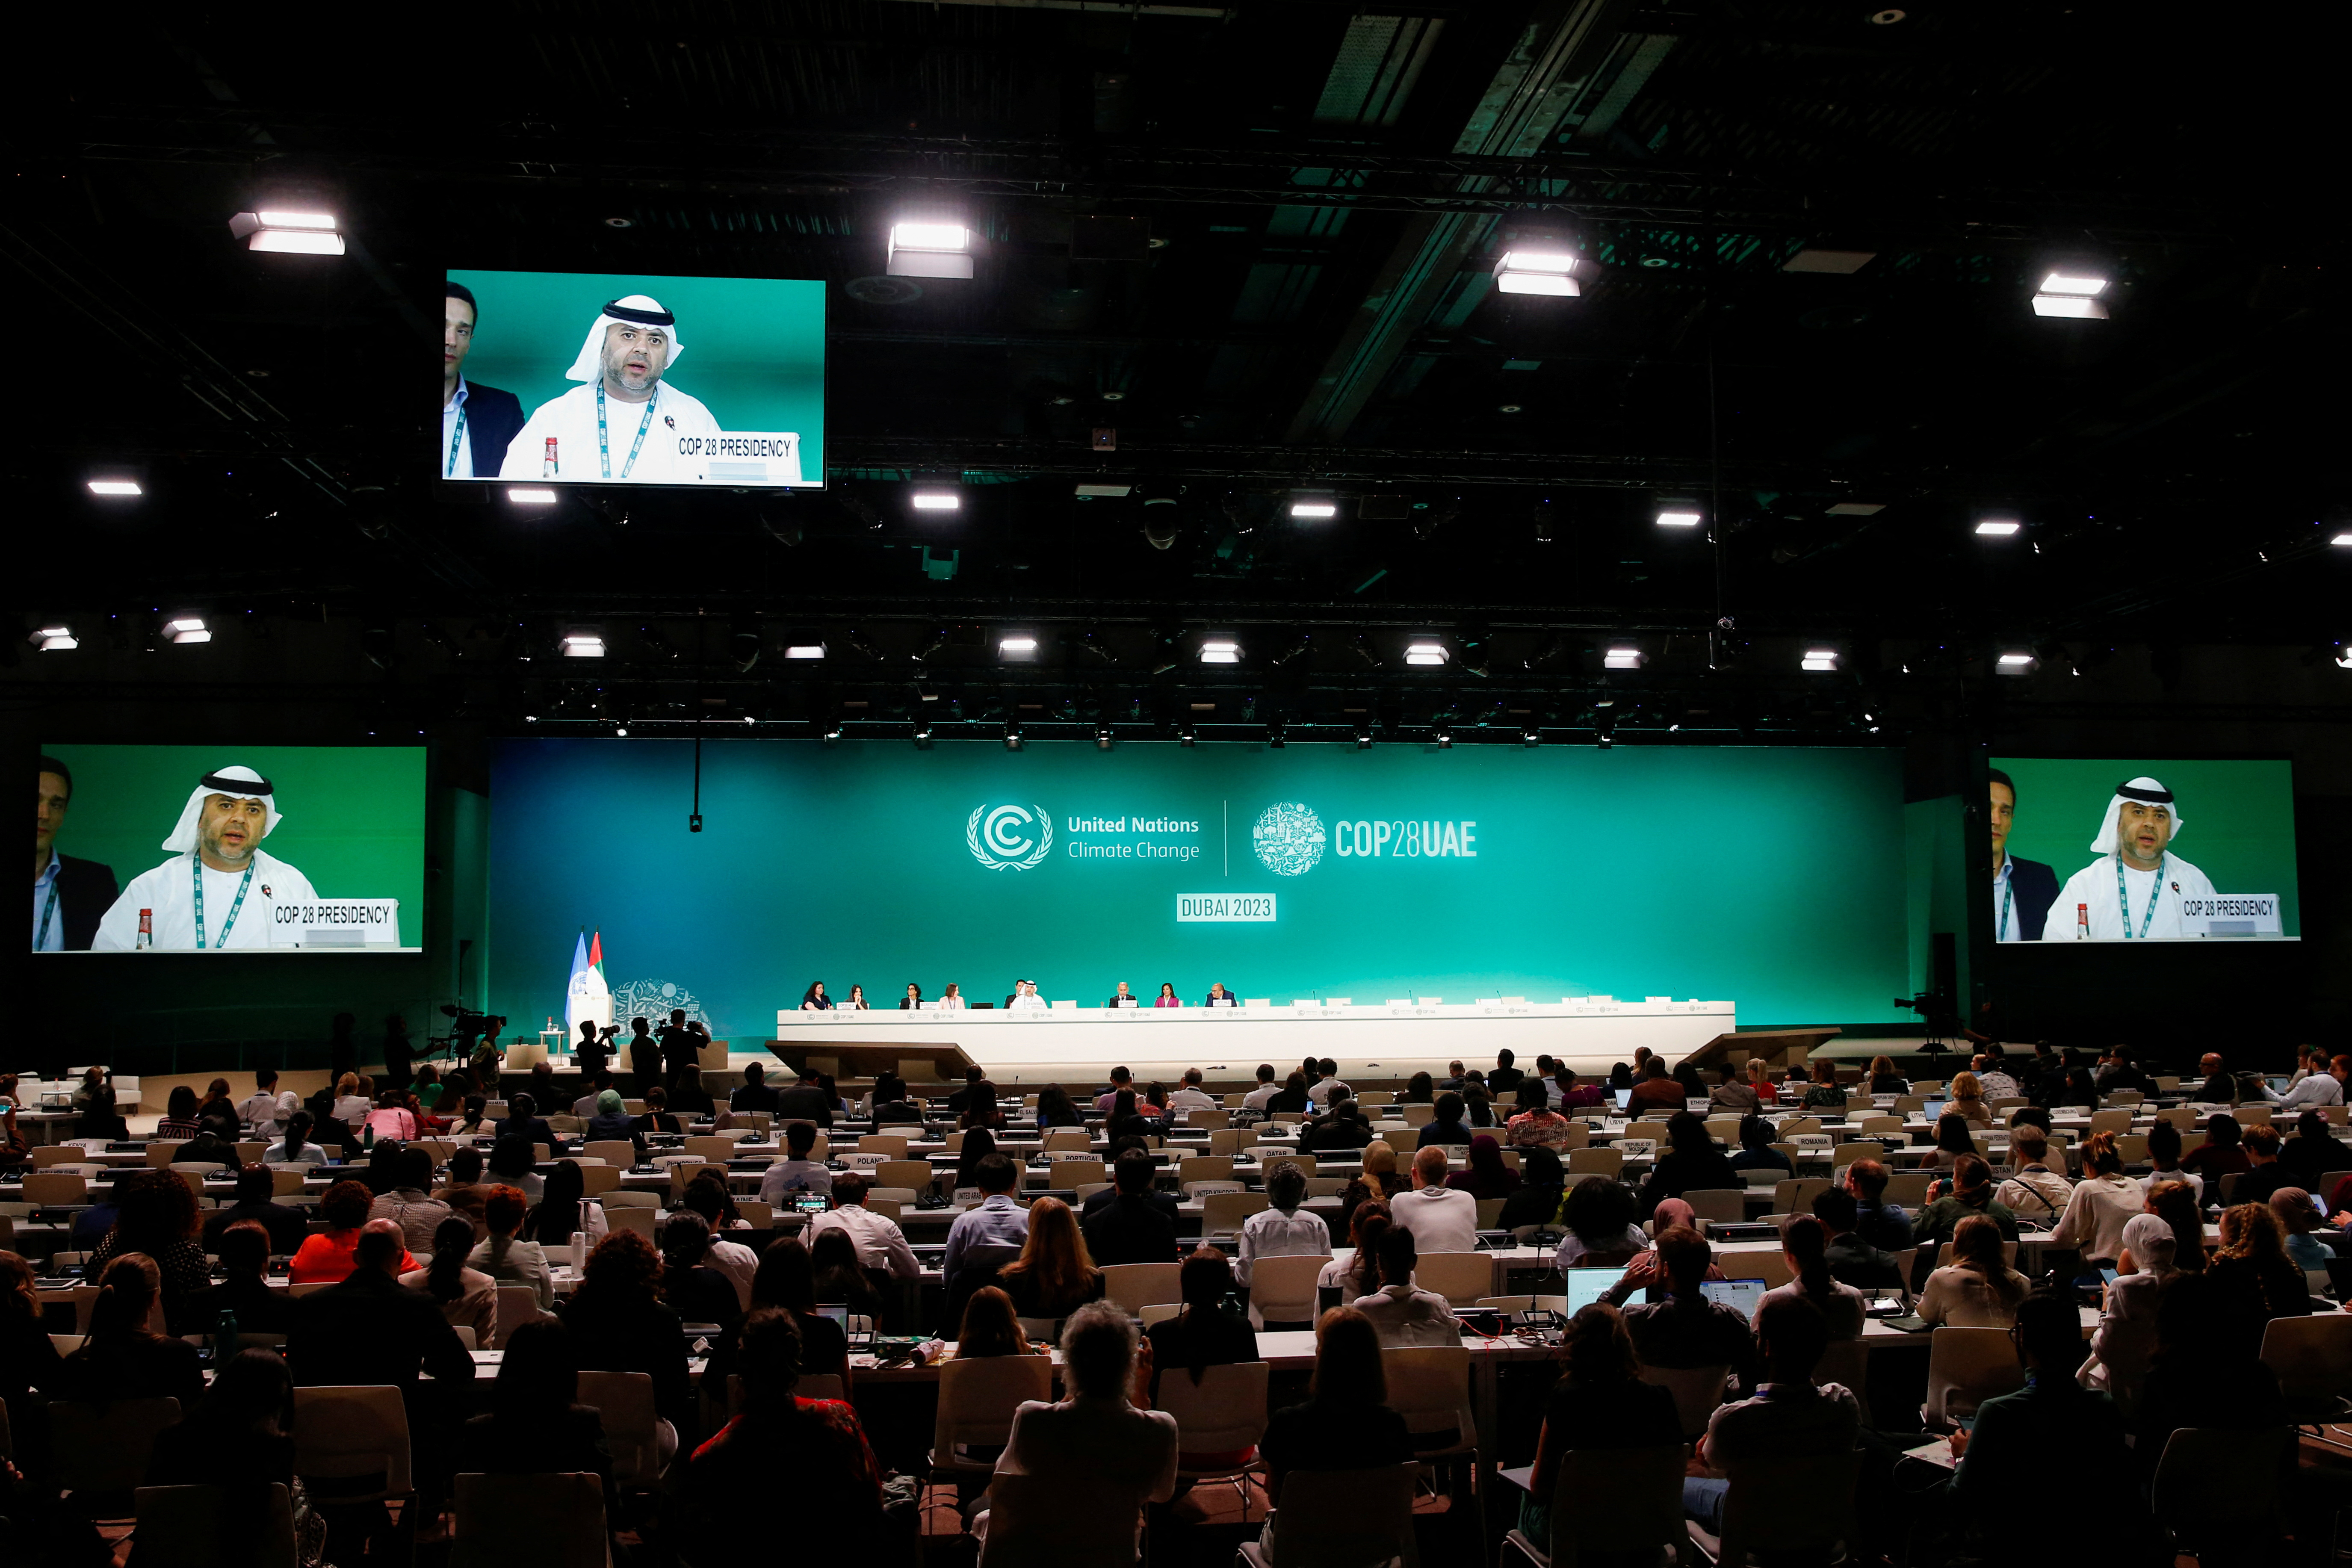 Did Cop 28 president use climate conference to make oil deals?